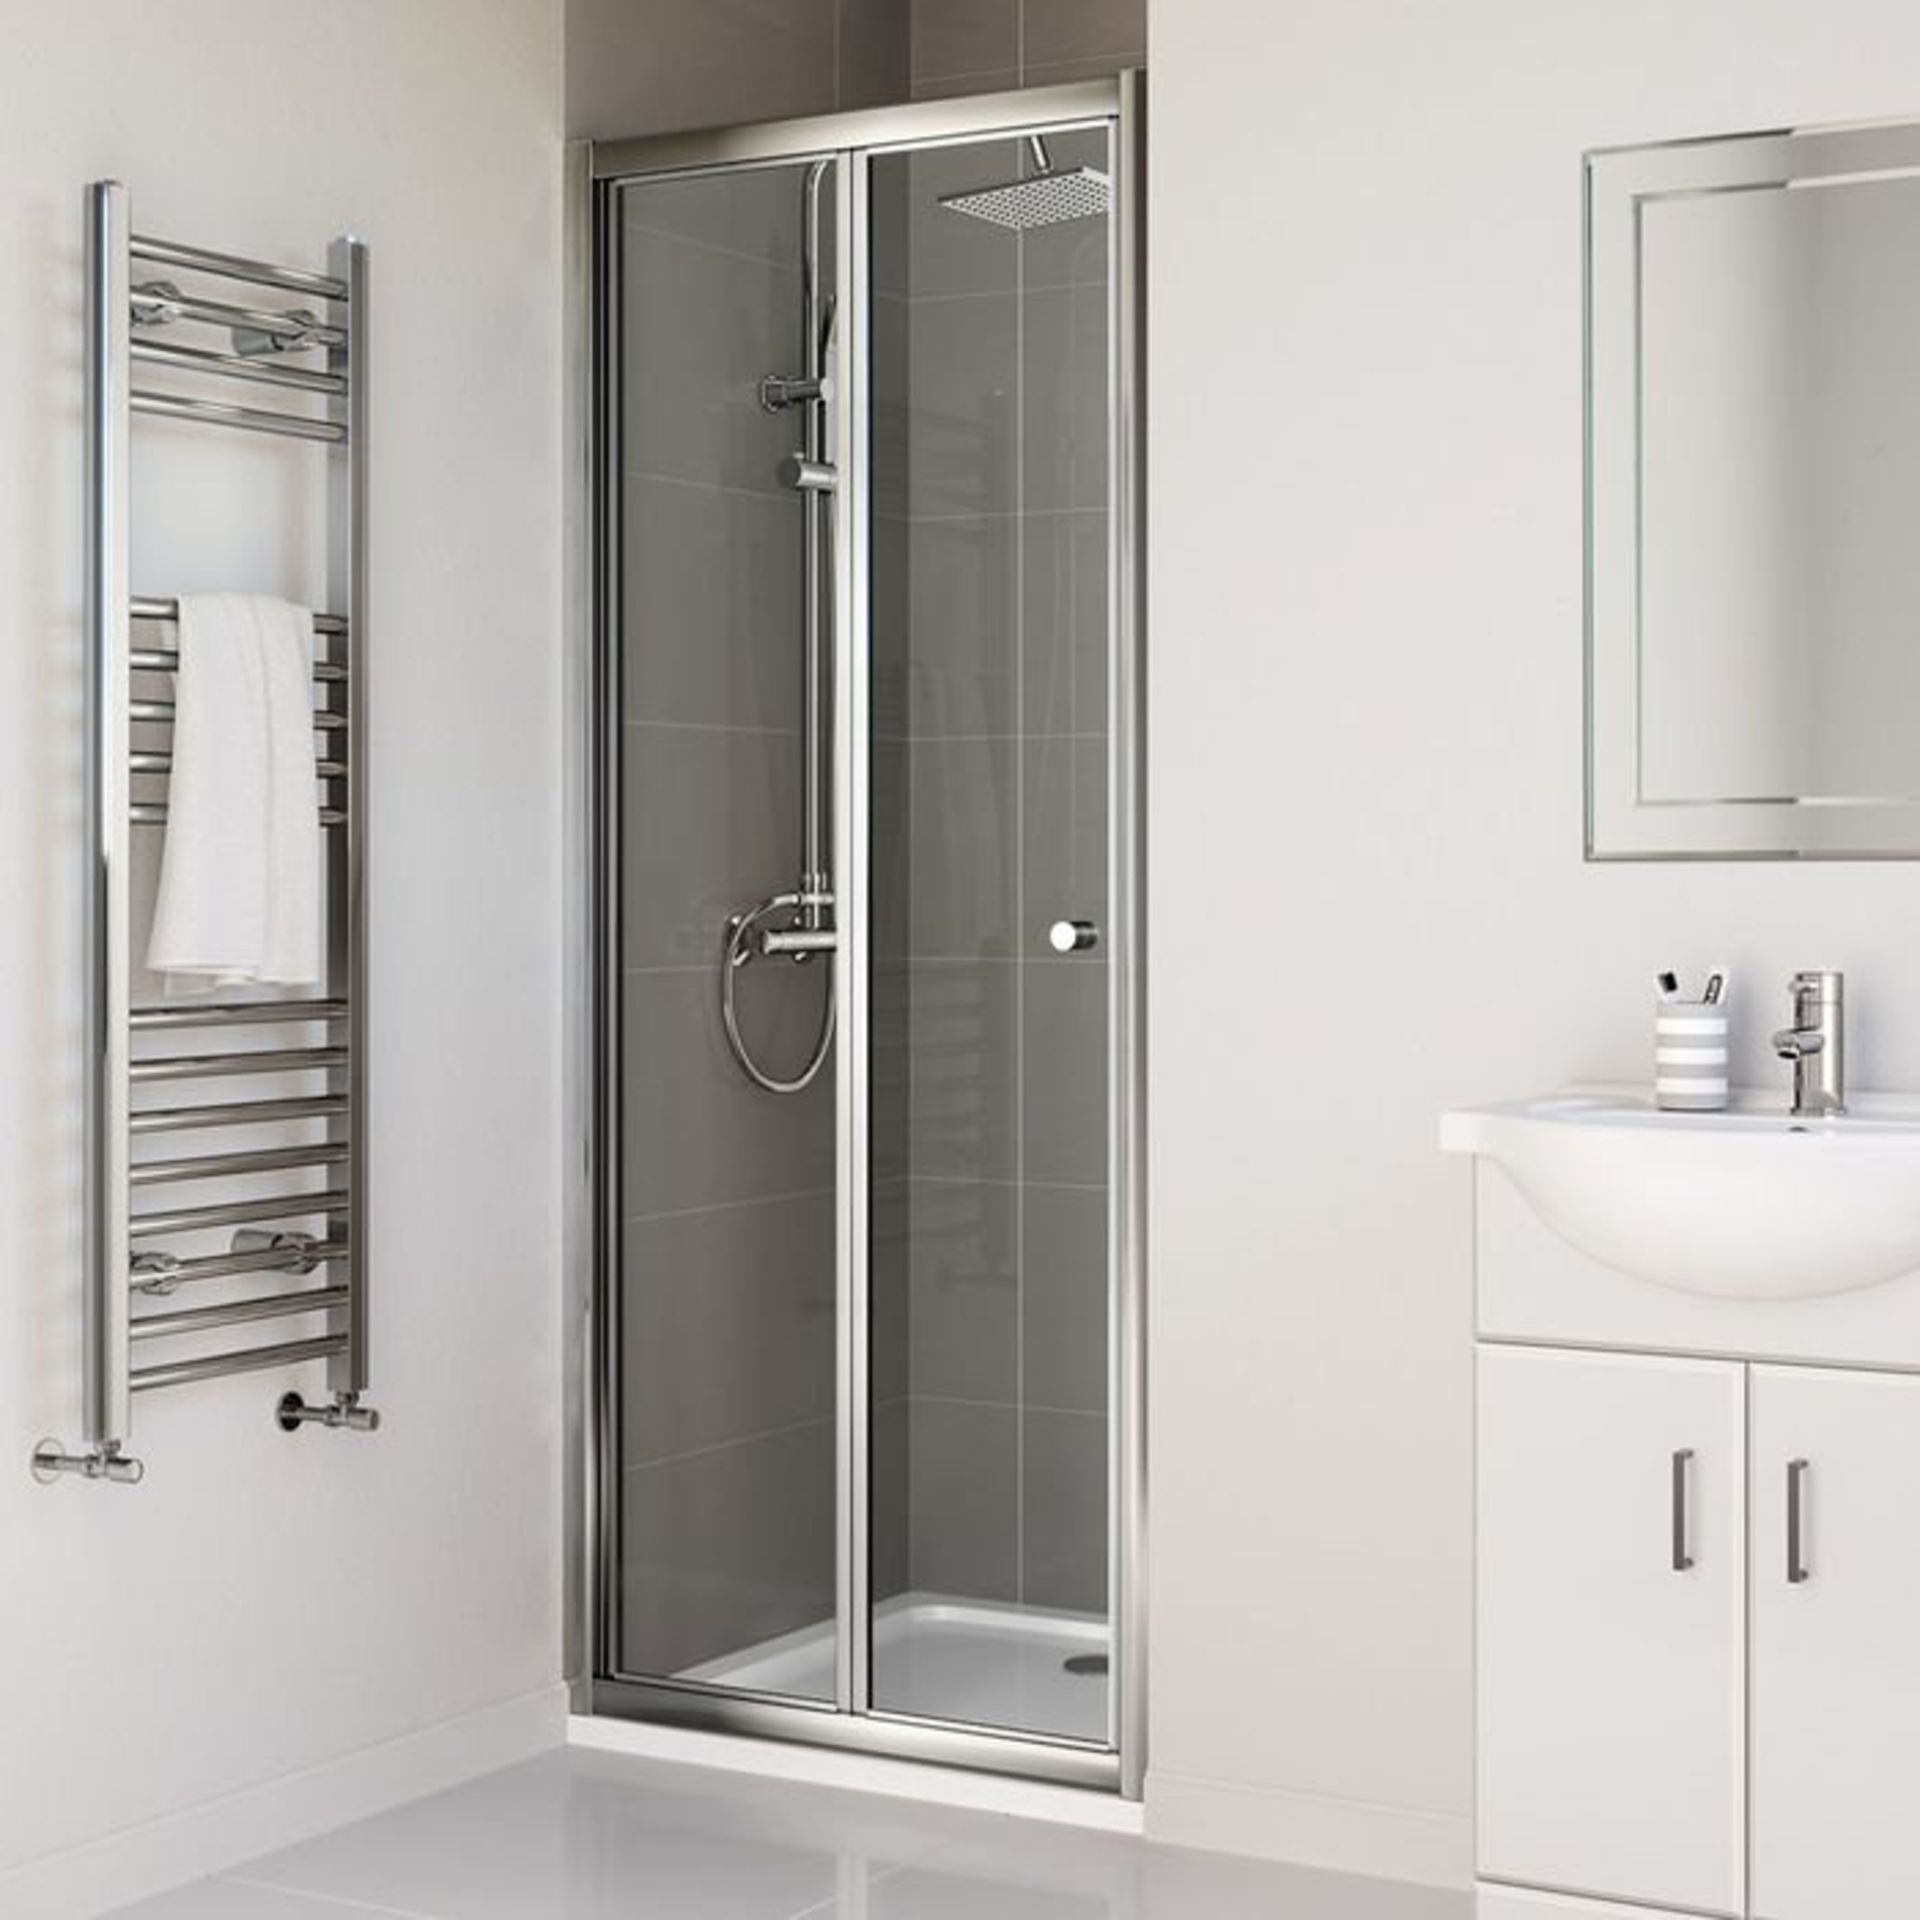 (A21) 900mm - Elements Bi Fold Shower Door RRP £299.99 4mm Safety Glass Fully waterproof tested with